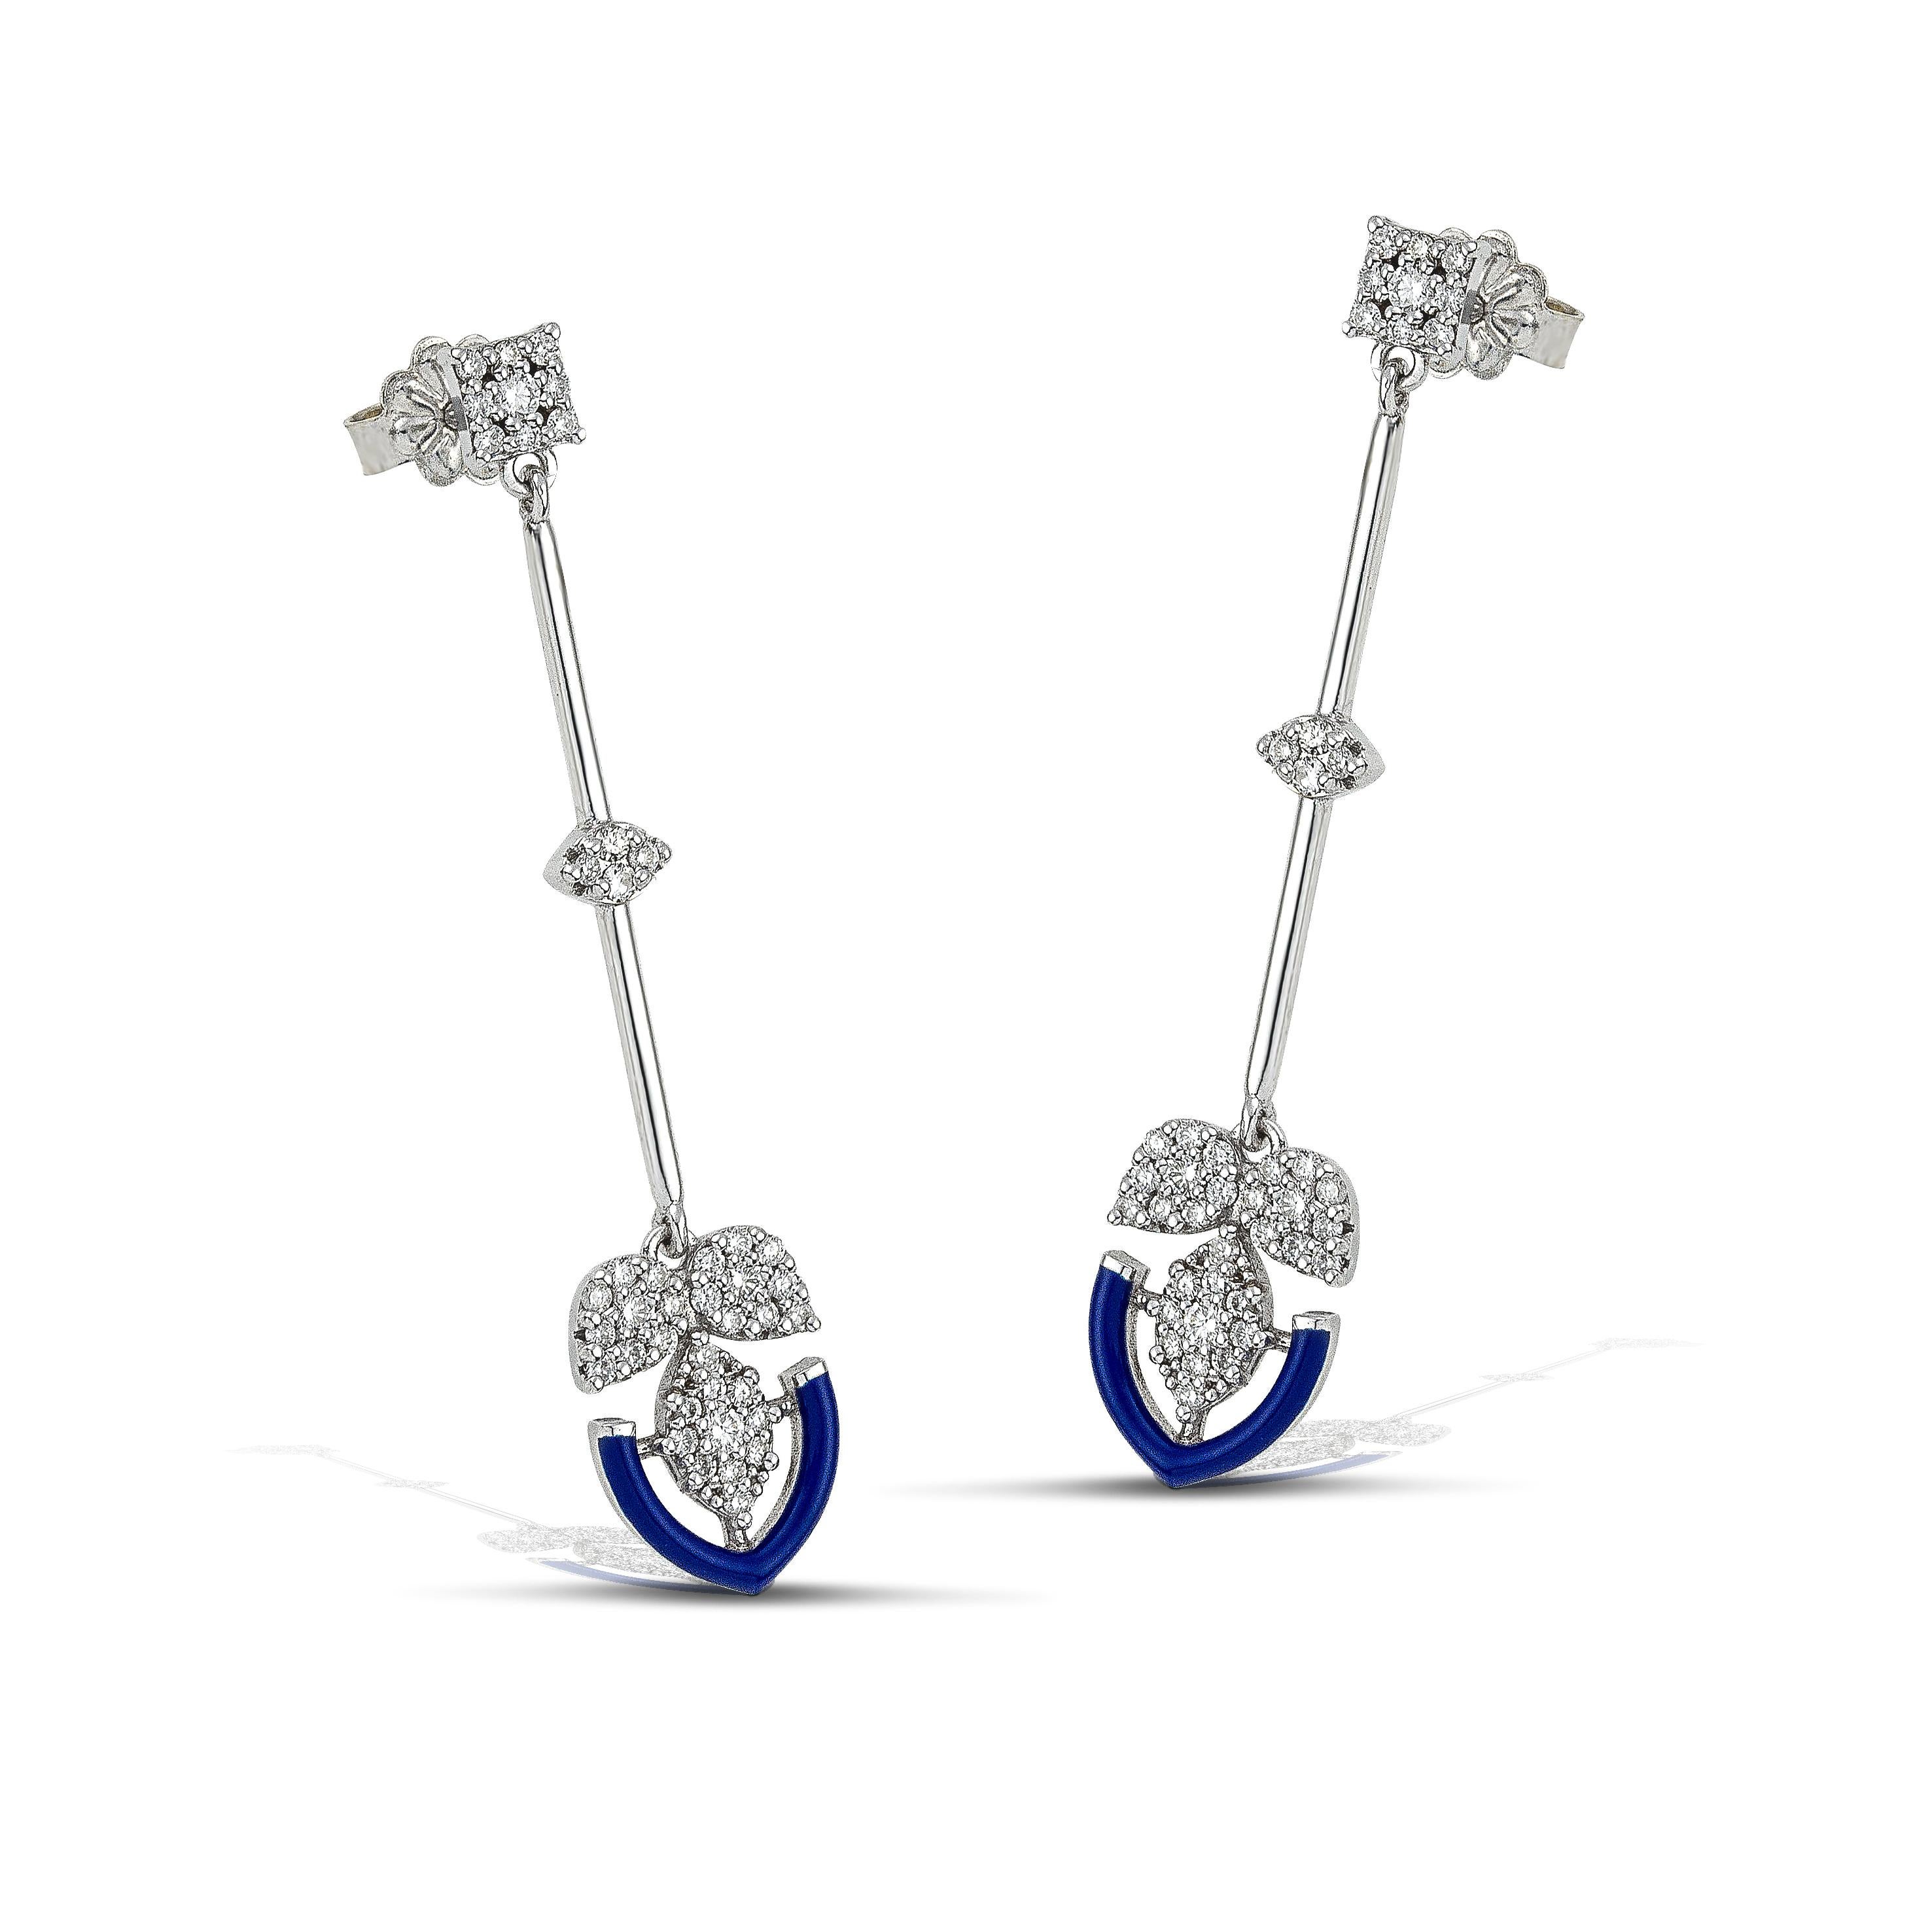 14K gold diamond earrings with a bold navy colour accent, the perfect gift for yourself or a loved one.
100% Recycled 14 K White Gold
Diamonds
Navy Enamel
Size: 5cm/1,96 inches
Inspiration: In the arts, maximalism, a reaction against minimalism, is